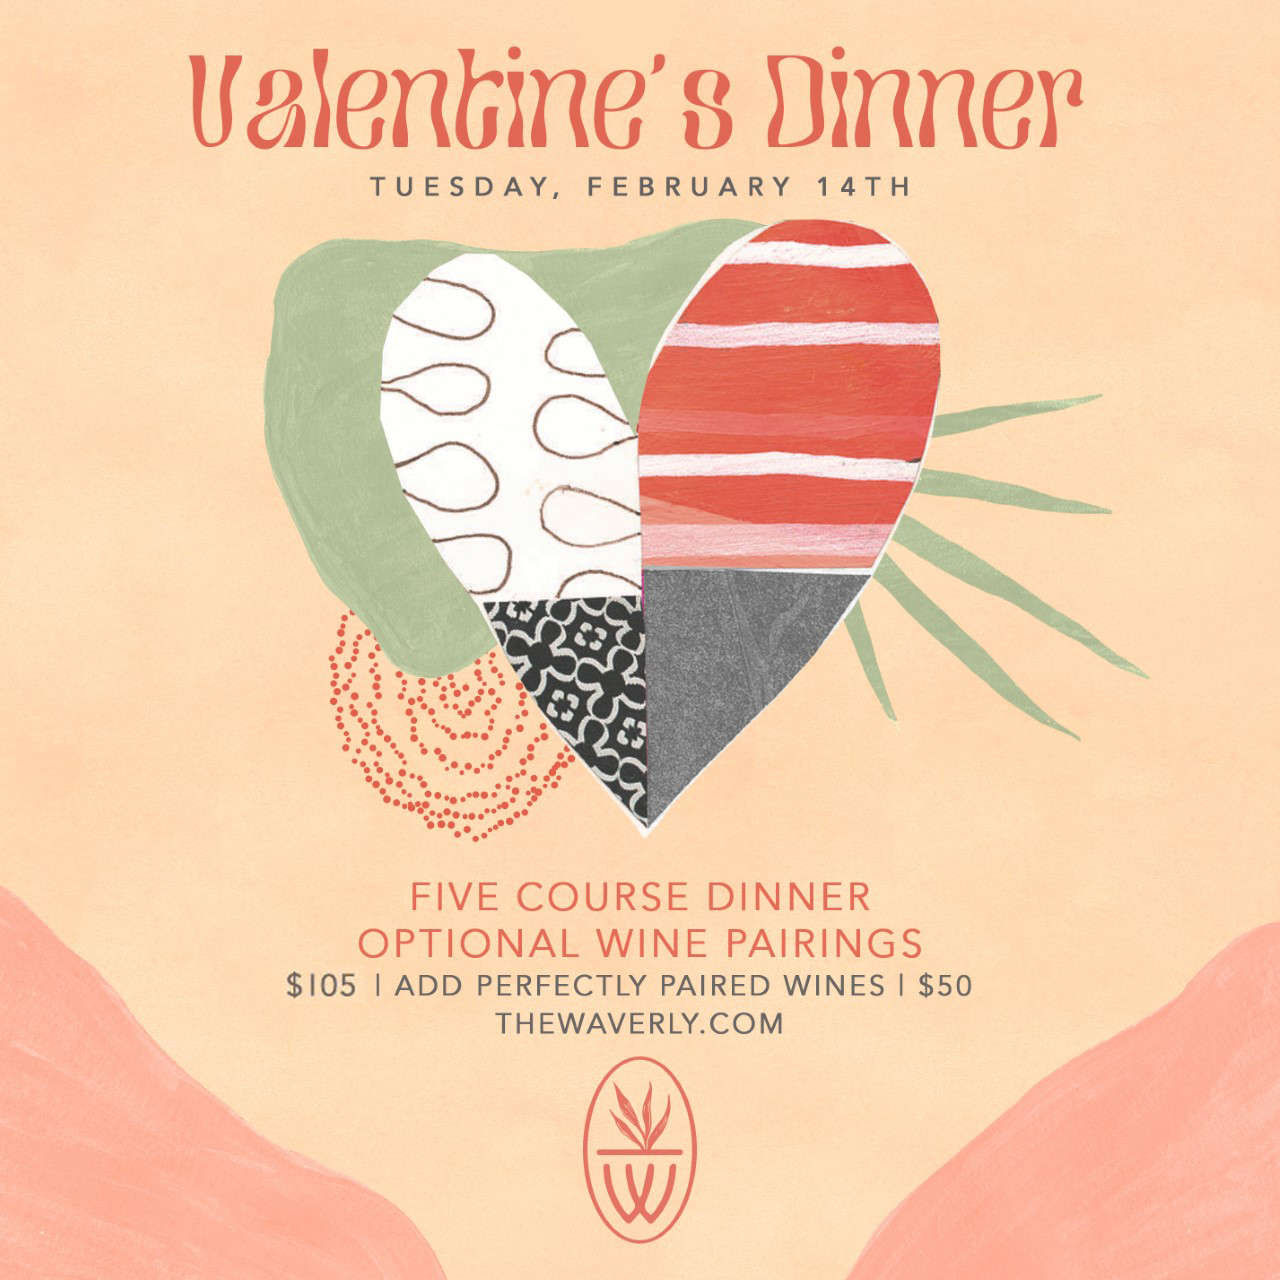 Valentine's Dinner Tuesday, February 14 Five course dinner